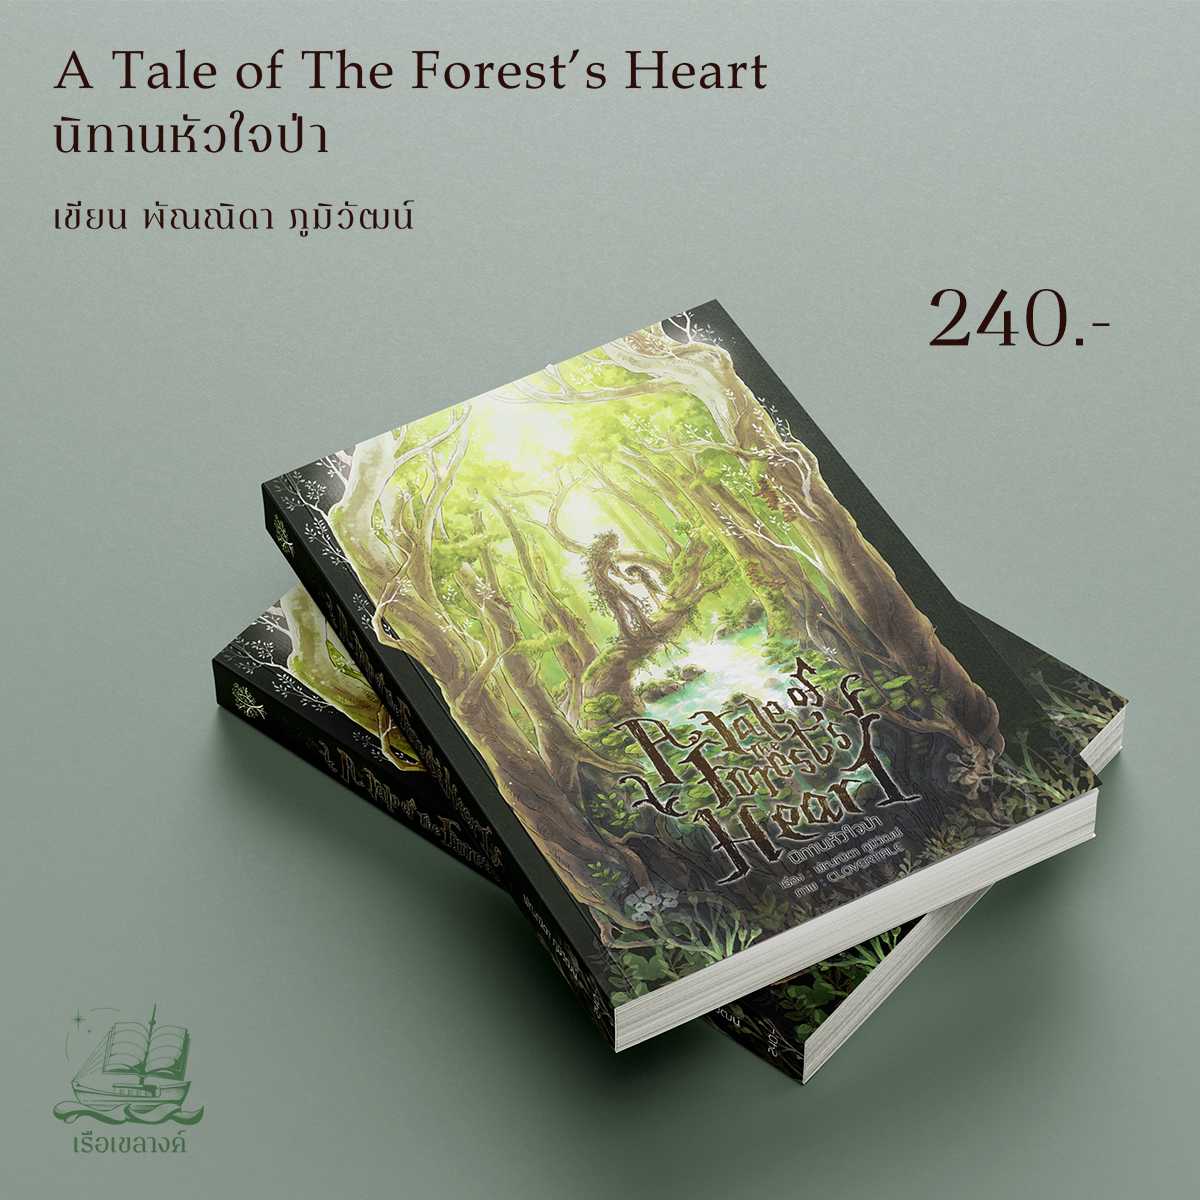 A Tale of The Forest's Heart